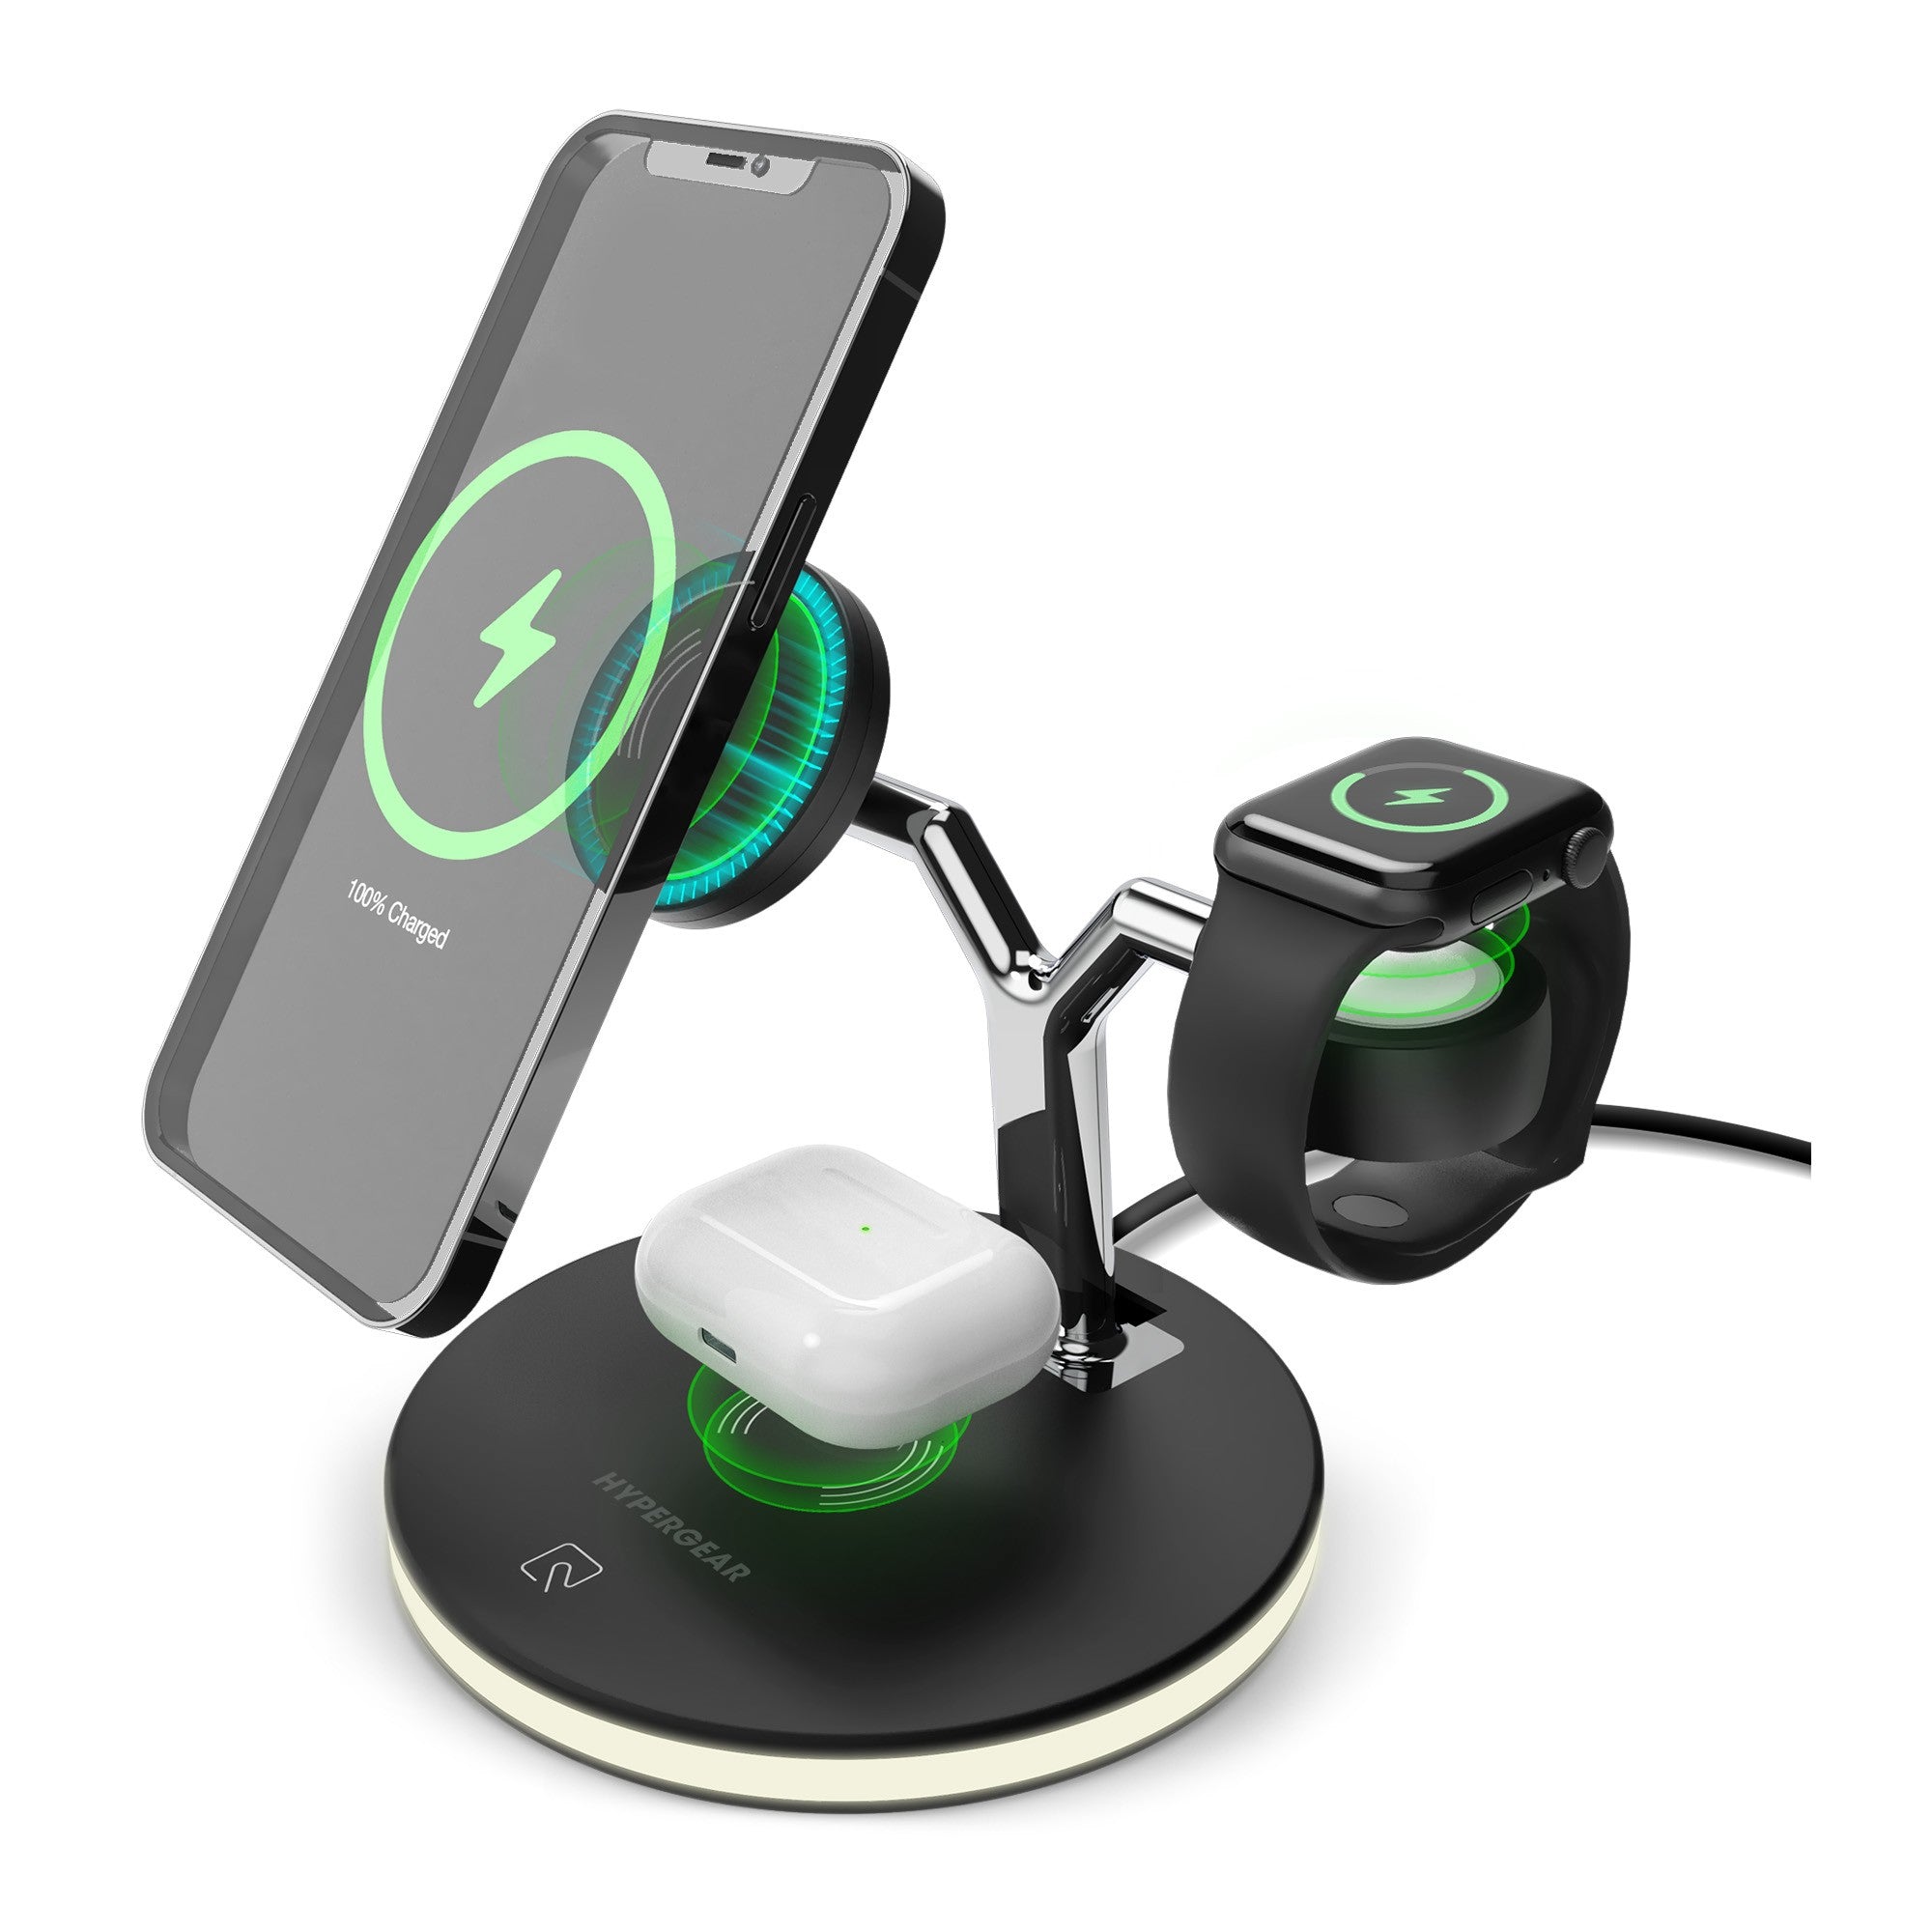 HyperGear 26W MaxCharge 3-in-1 Wireless Charging Stand Compatible with MagSafe - Black - 15-09954